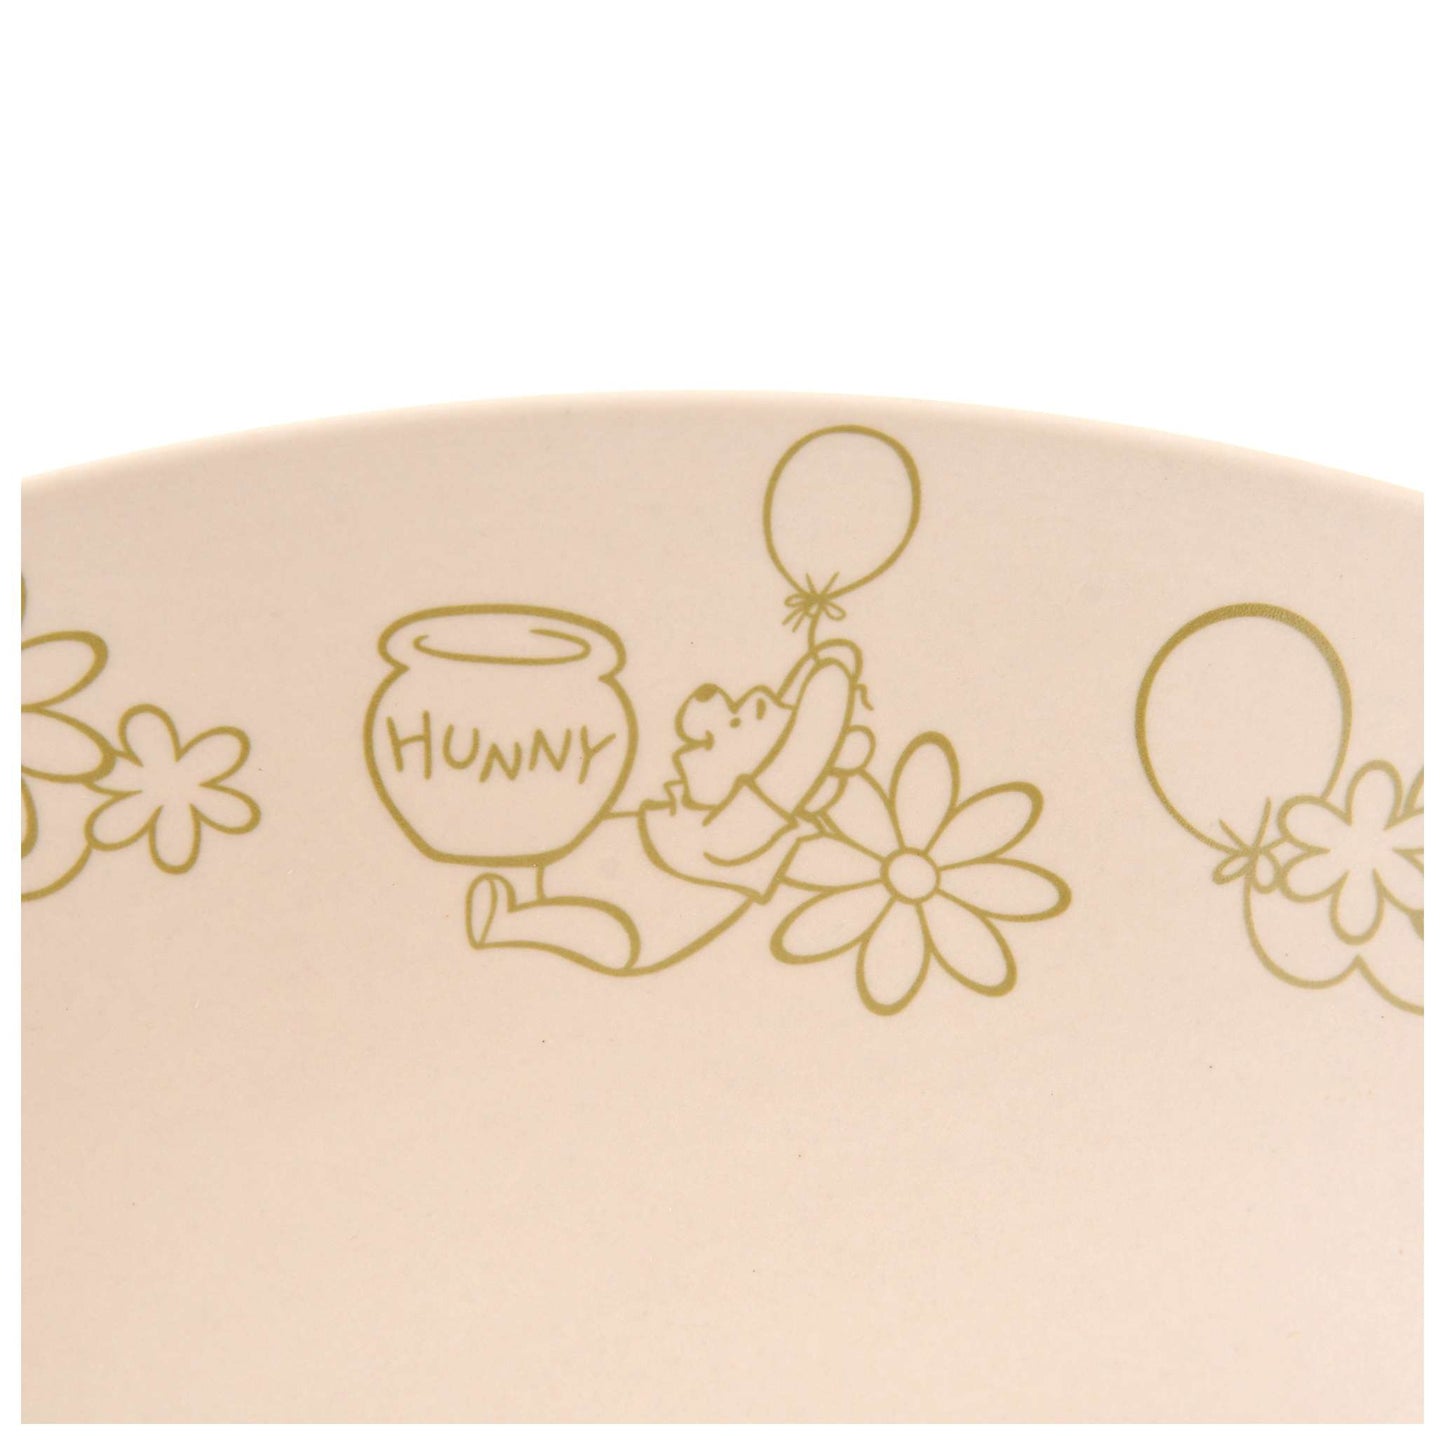 Disney Store - Pooh 3 Size - Plate